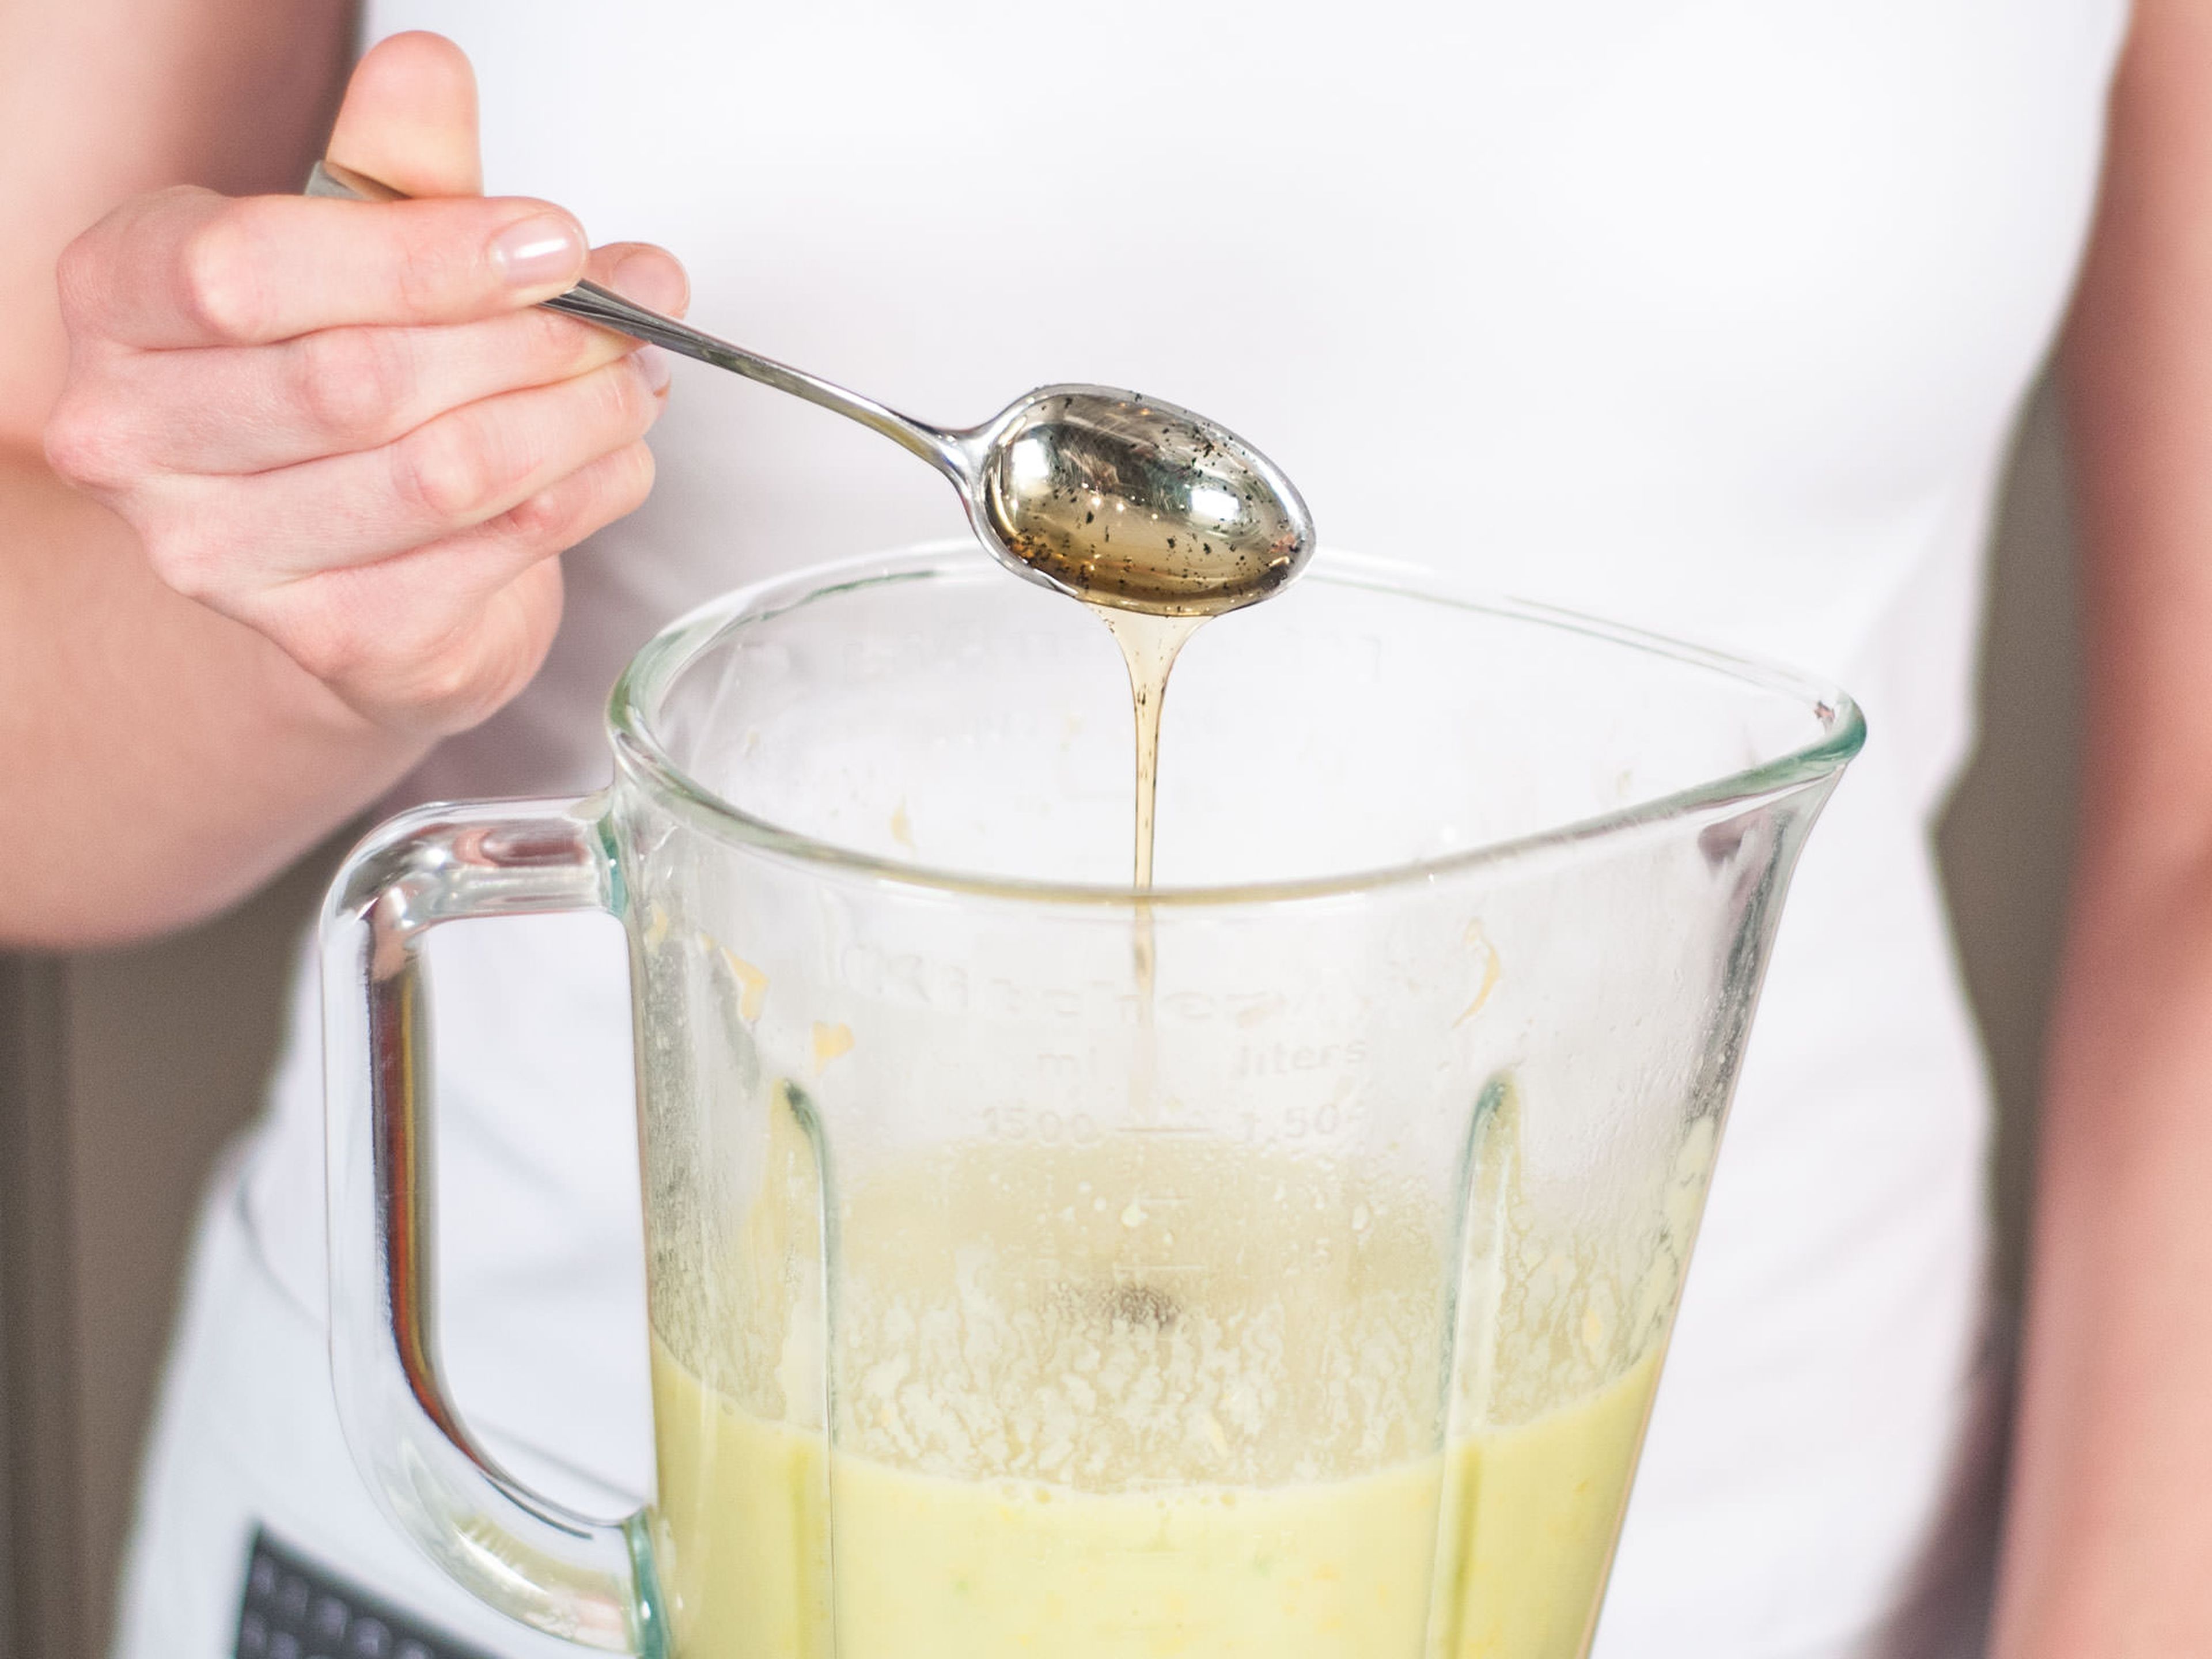 Pause blender and add vanilla extract. Then continue to mix for approx. 1 – 2 min. Enjoy immediately. For an even more refreshing experience, serve on ice.